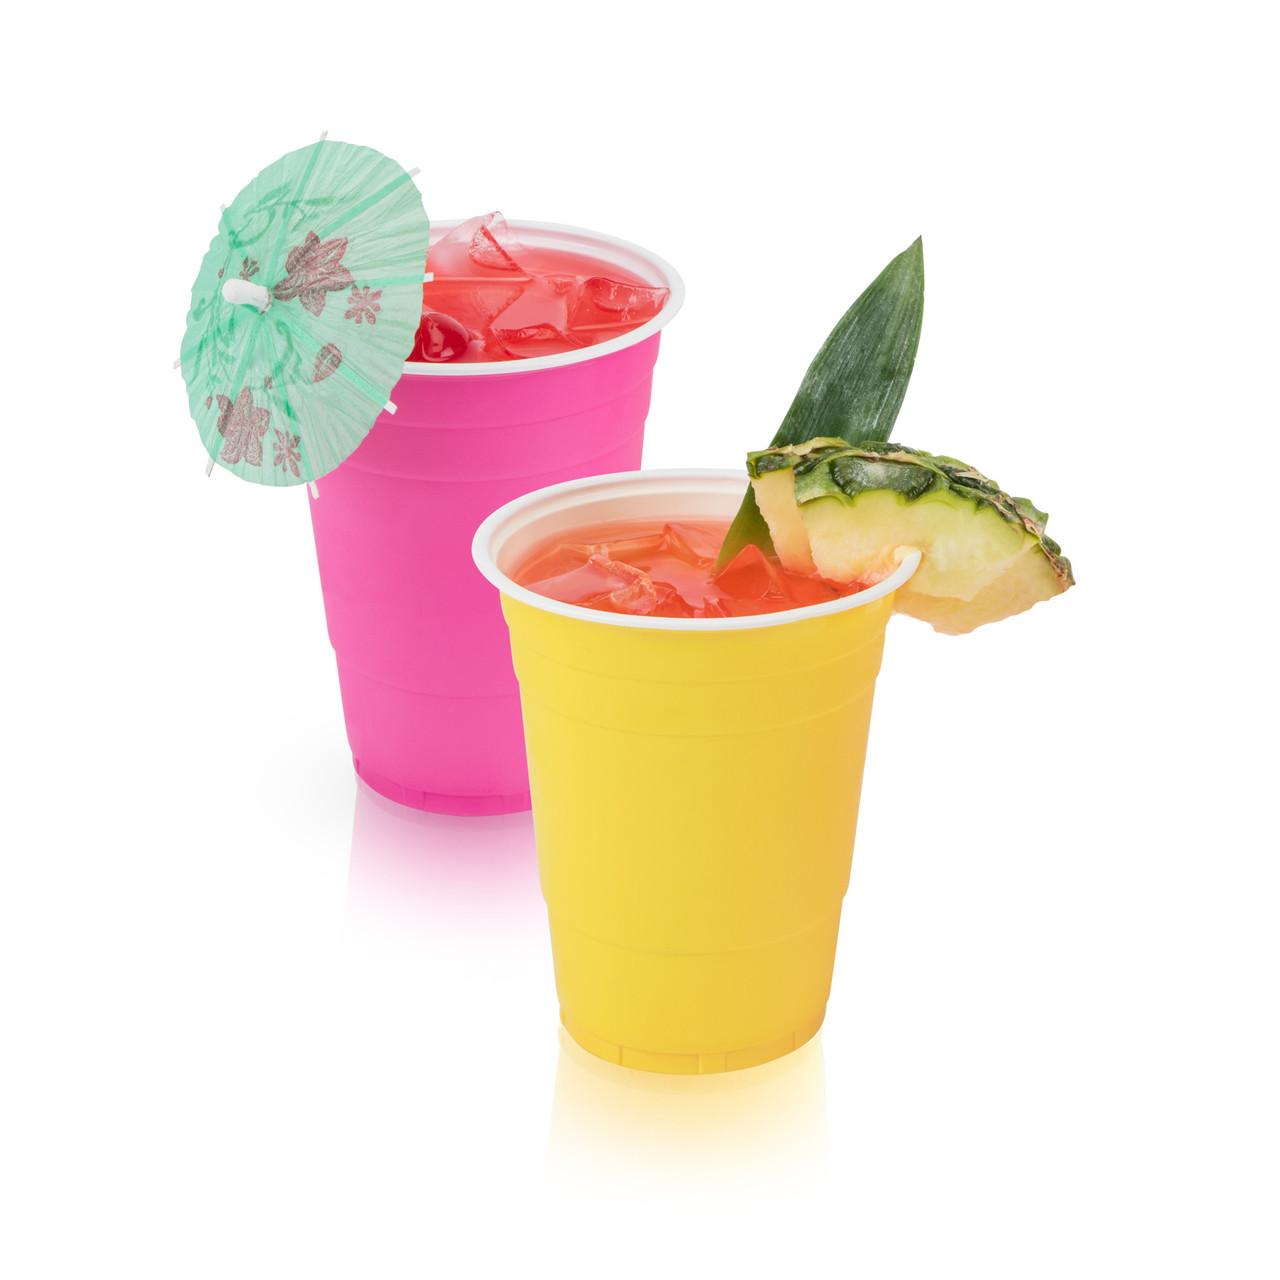 16 oz Bright Color Plastic Cups, Set of 24 by True